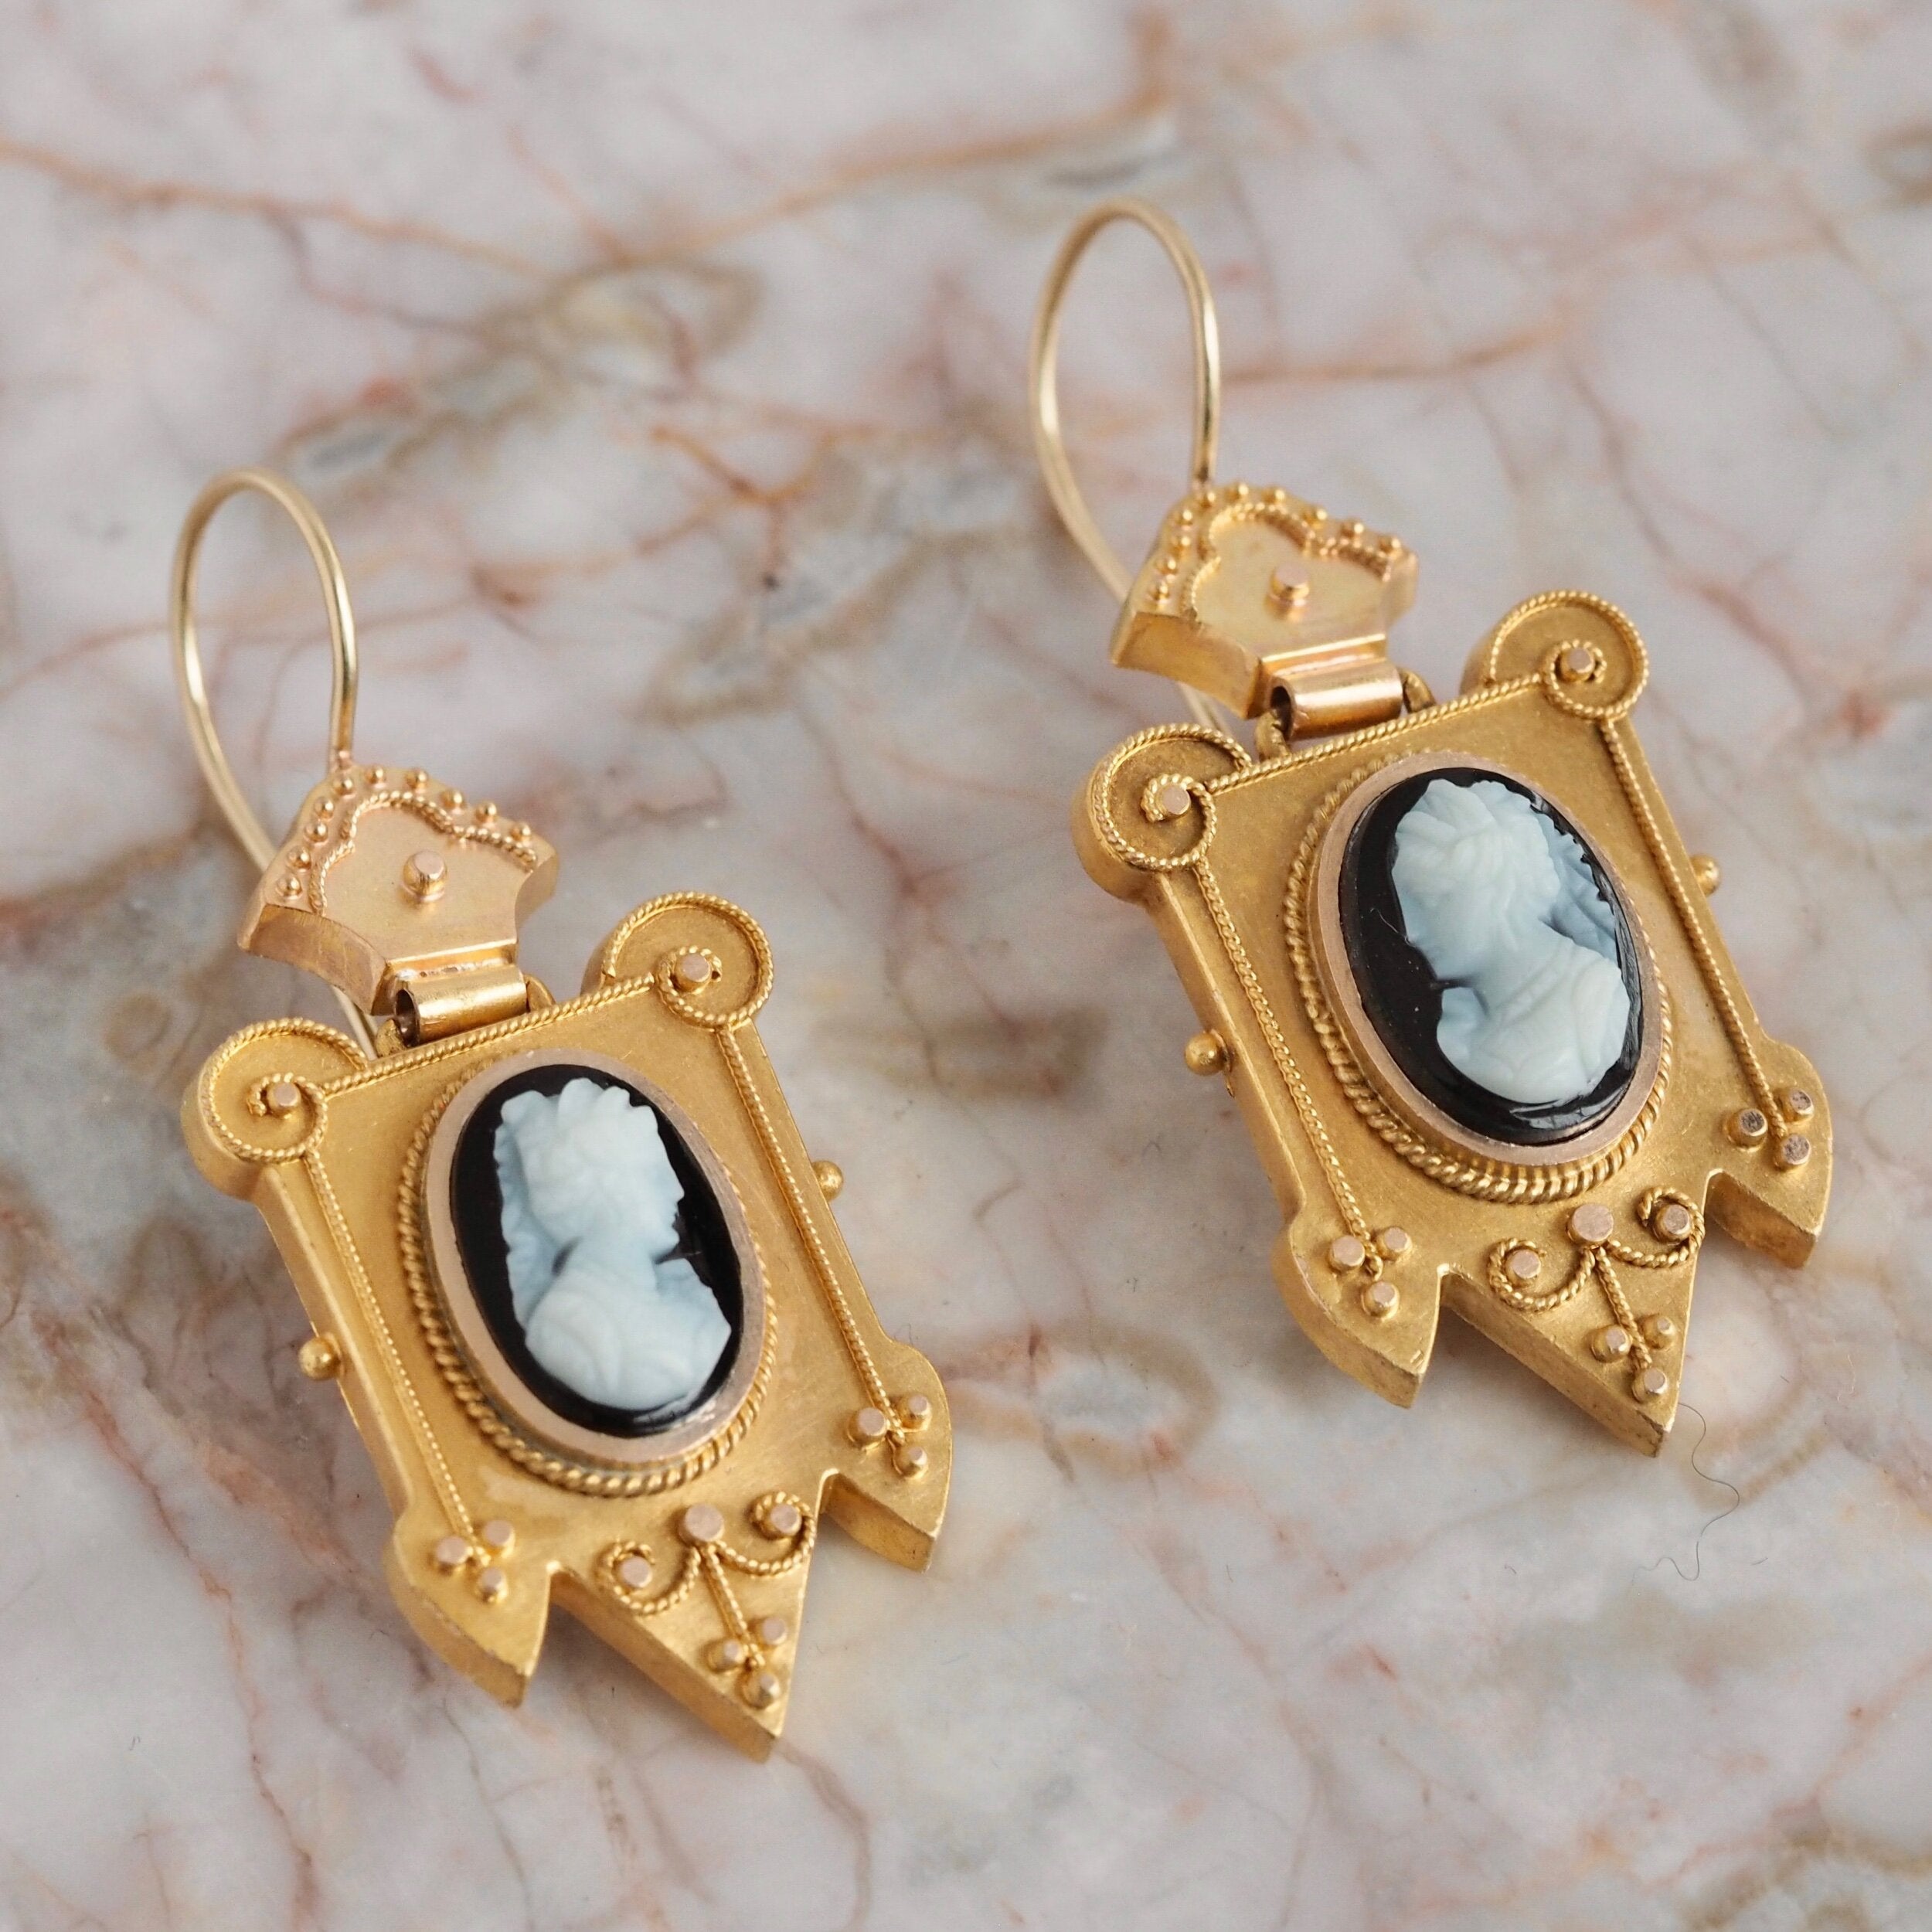 Antique Victorian Etruscan Revival 14k Gold Hardstone Cameo Earrings